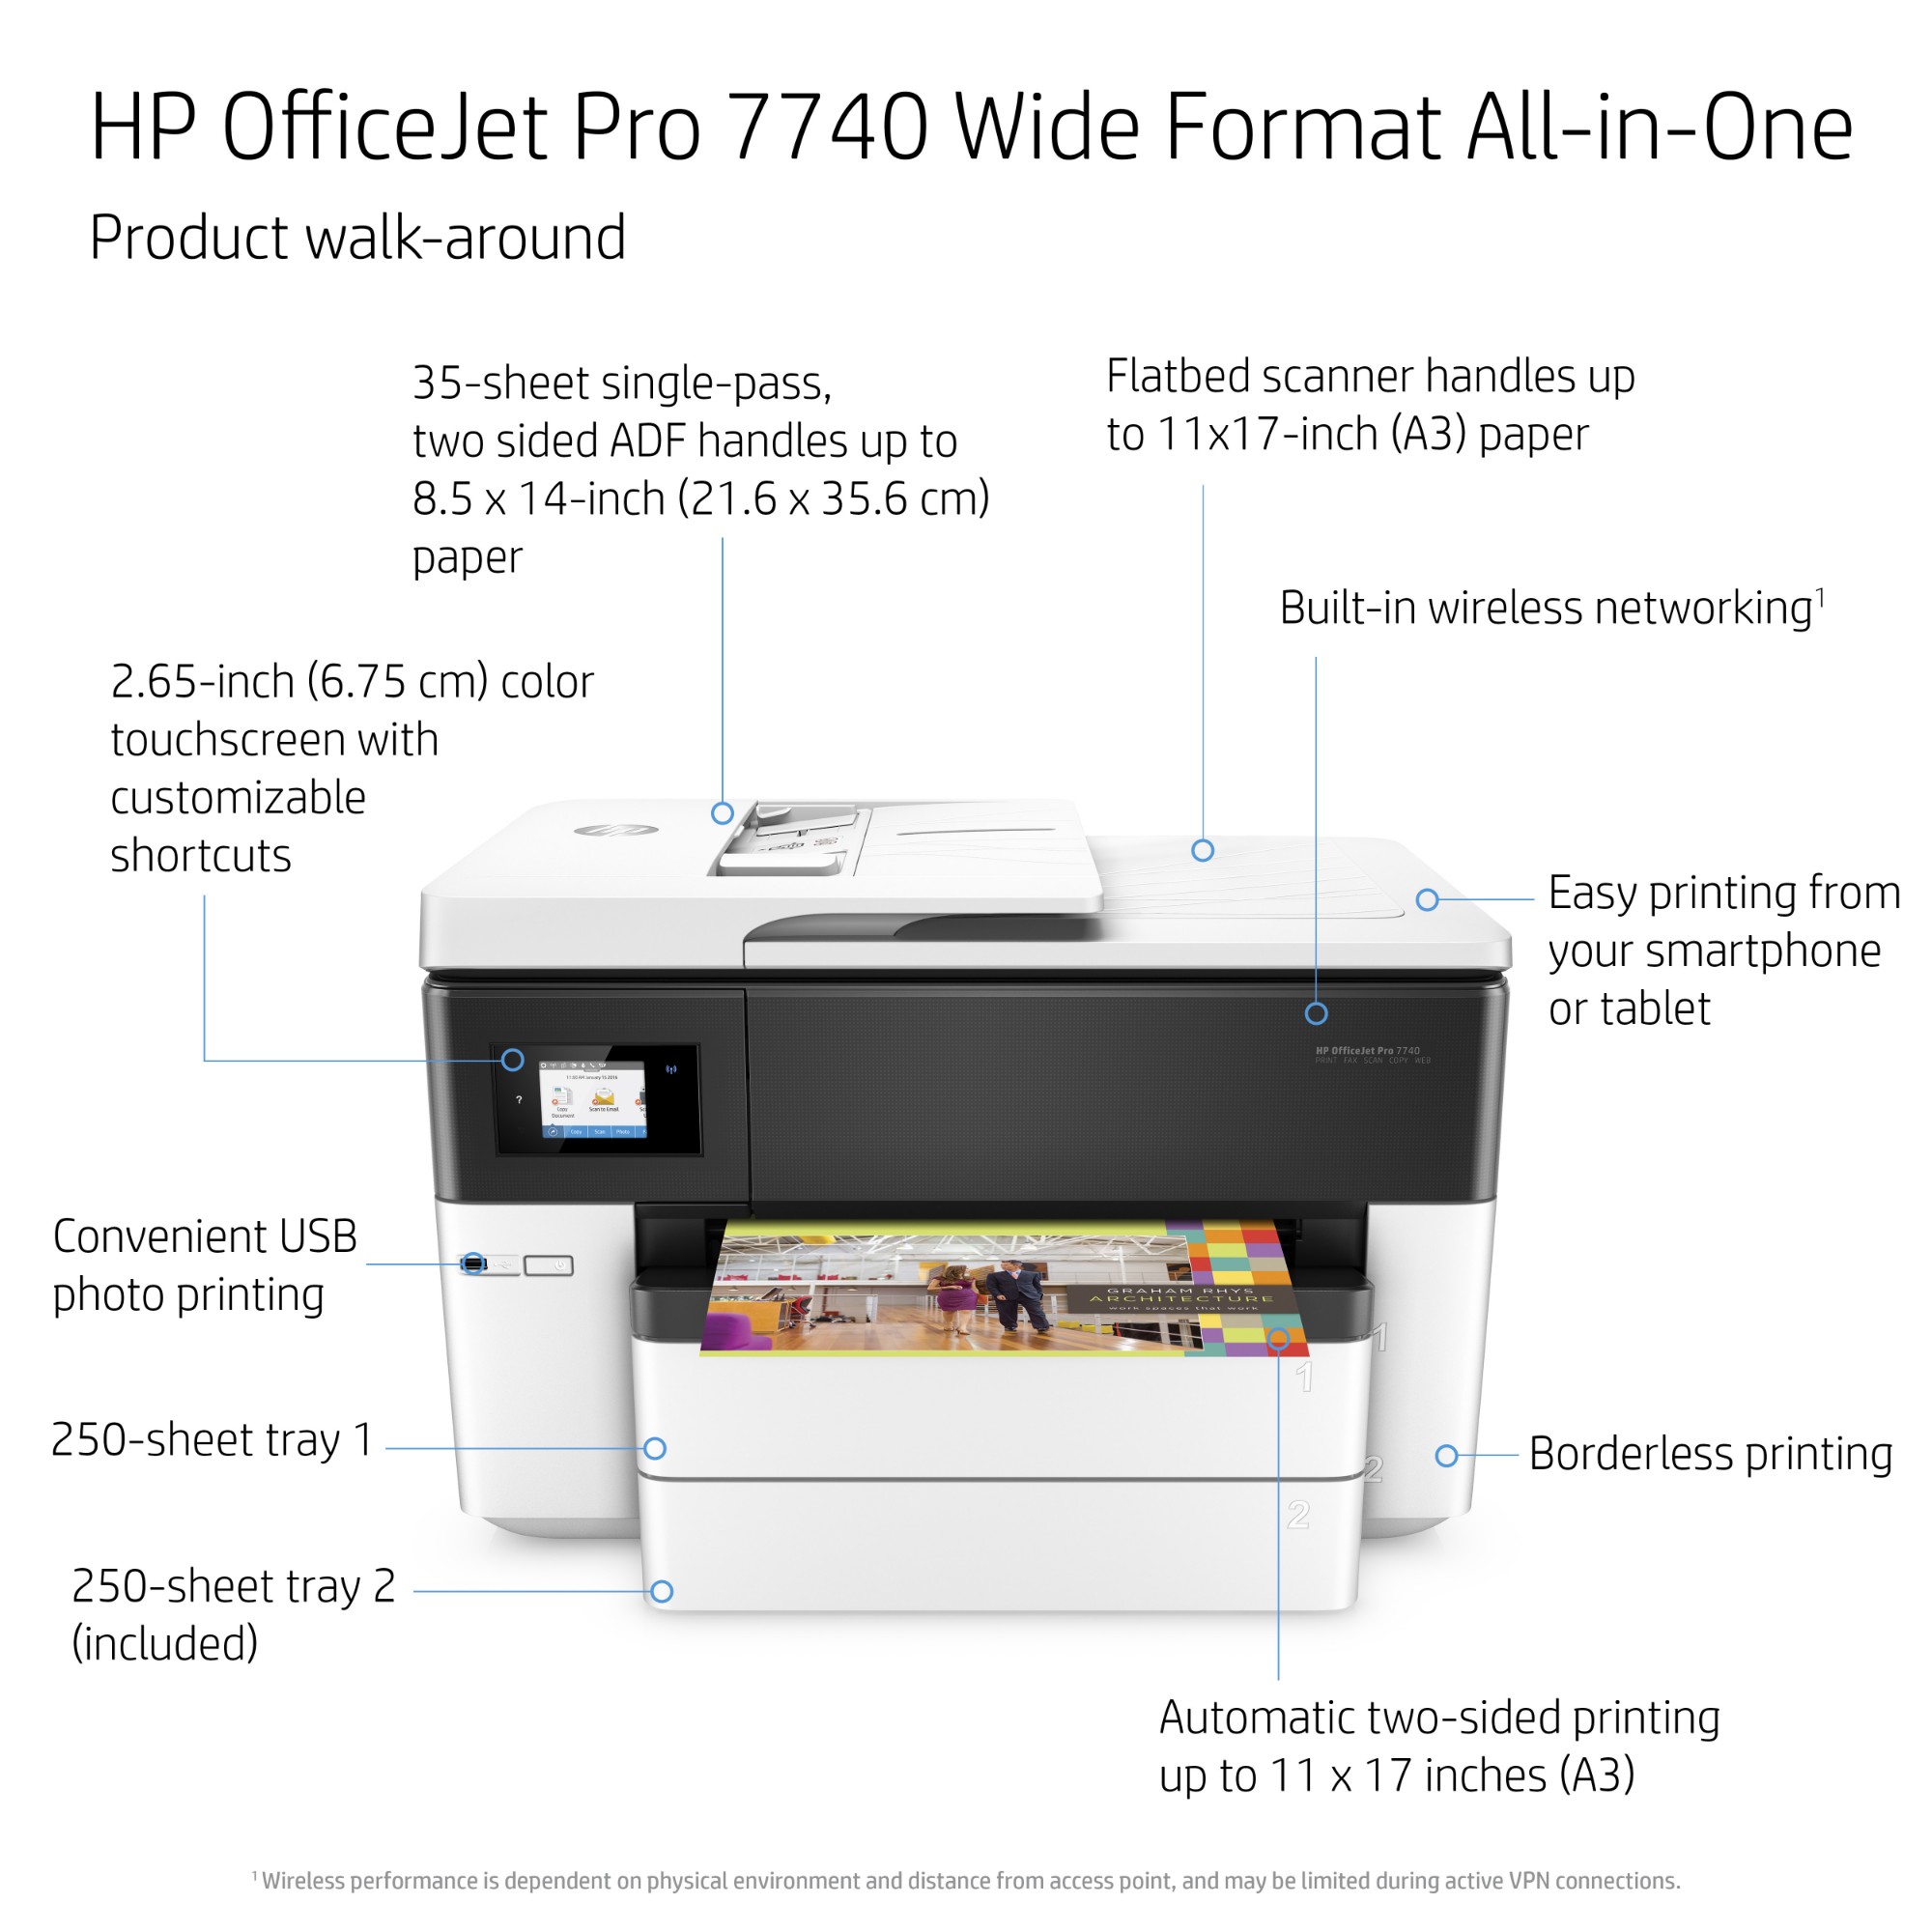 HP
OfficeJet 7740 WF e-All-in-One - Print, Copy, Scan, Fax. 35-Page ADF. 250 - sheet input tray + Second paper tray standard.